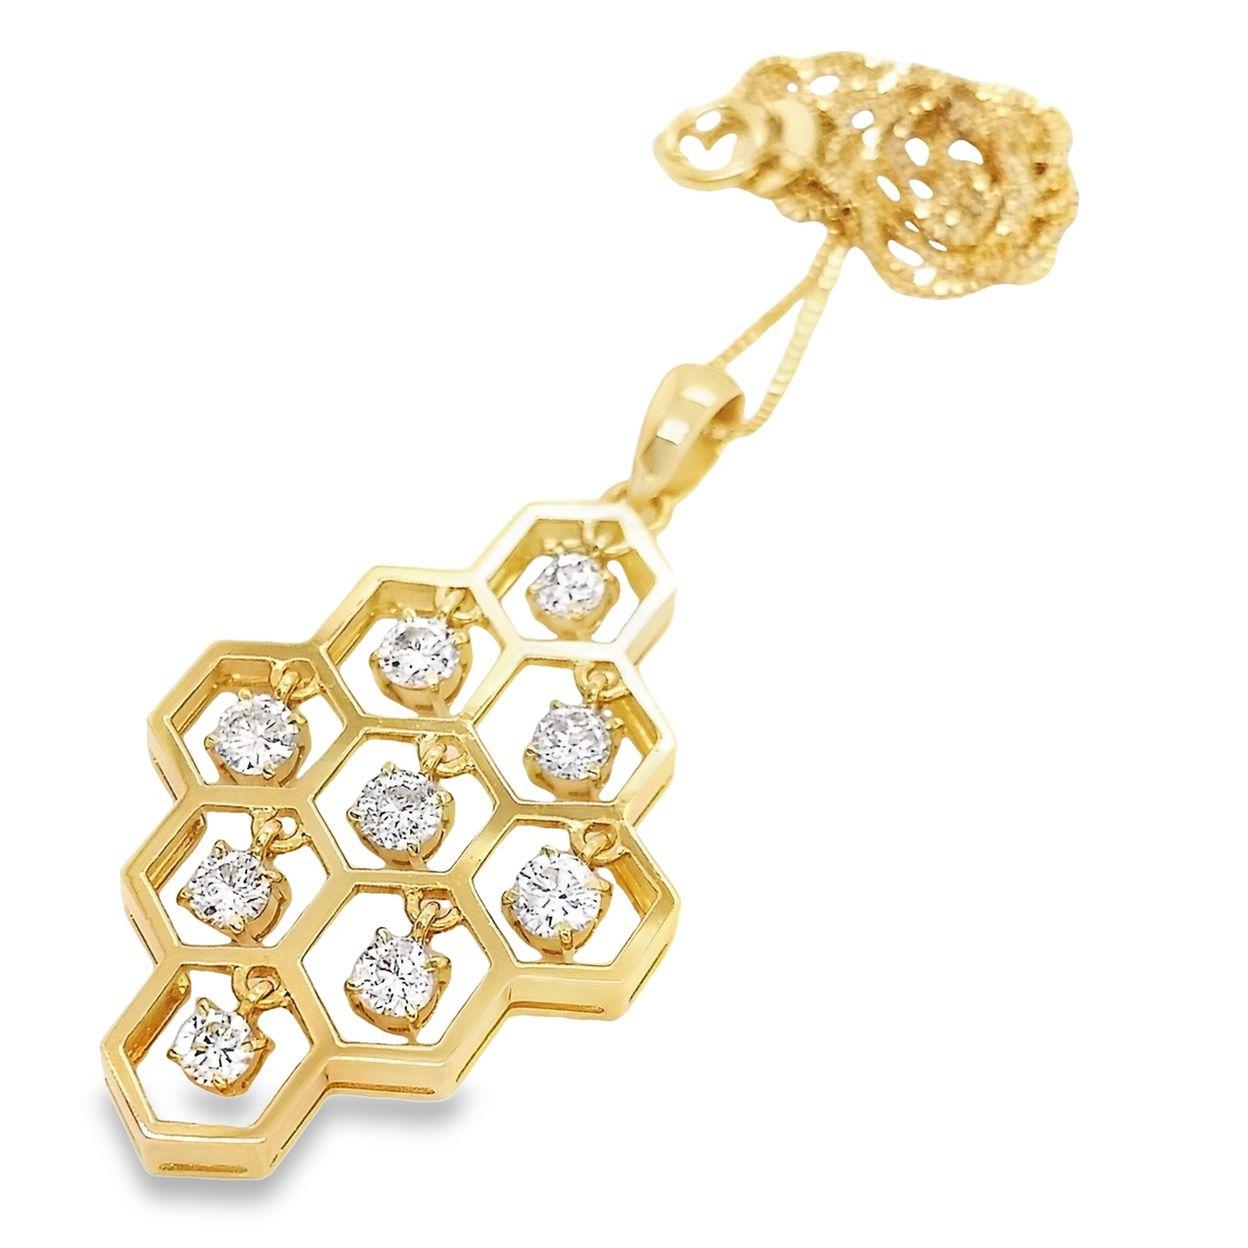 This chic 18KT yellow gold necklace, from the house of Top Crown Jewelry collection, is a unique piece of jewelry inspired by the delicate intricacy of a traditional and features 9 round brilliant natural sparkling diamonds totaling of 1.02